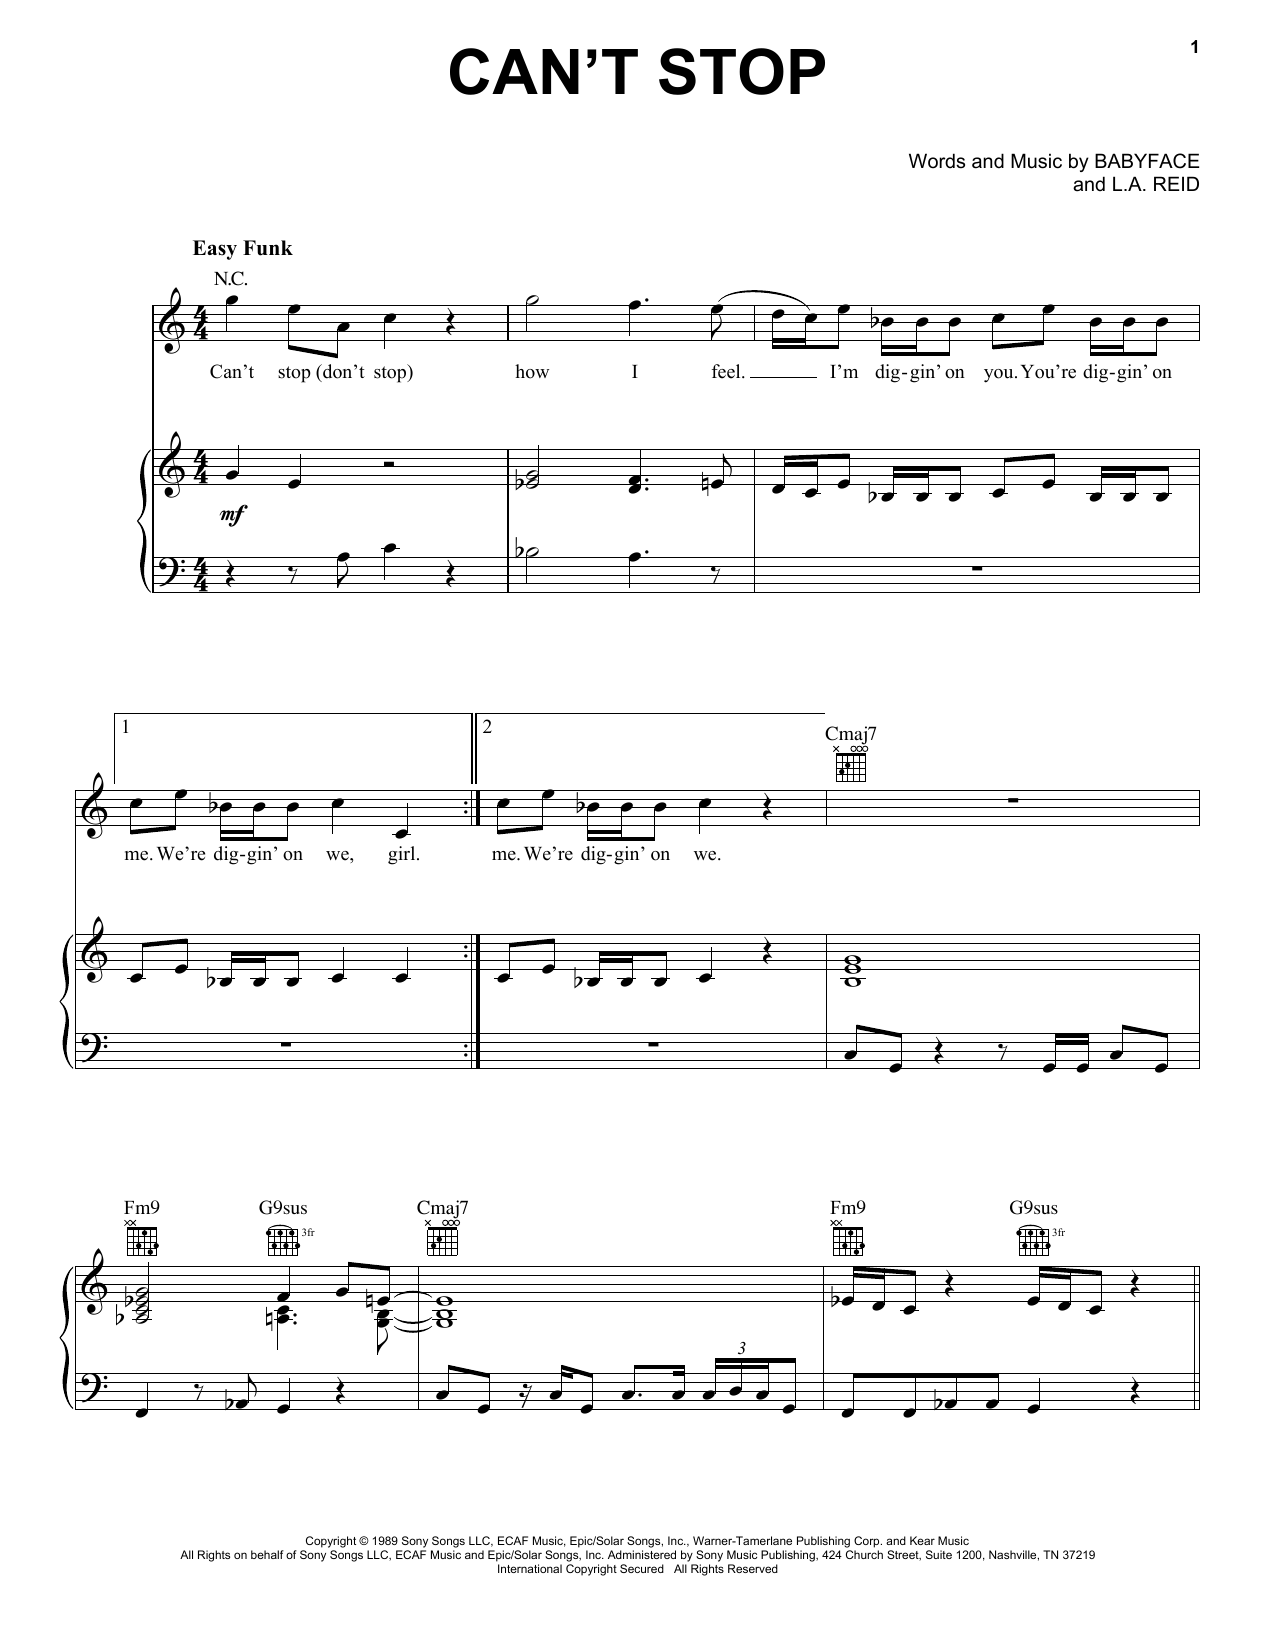 After 7 Can't Stop sheet music notes printable PDF score